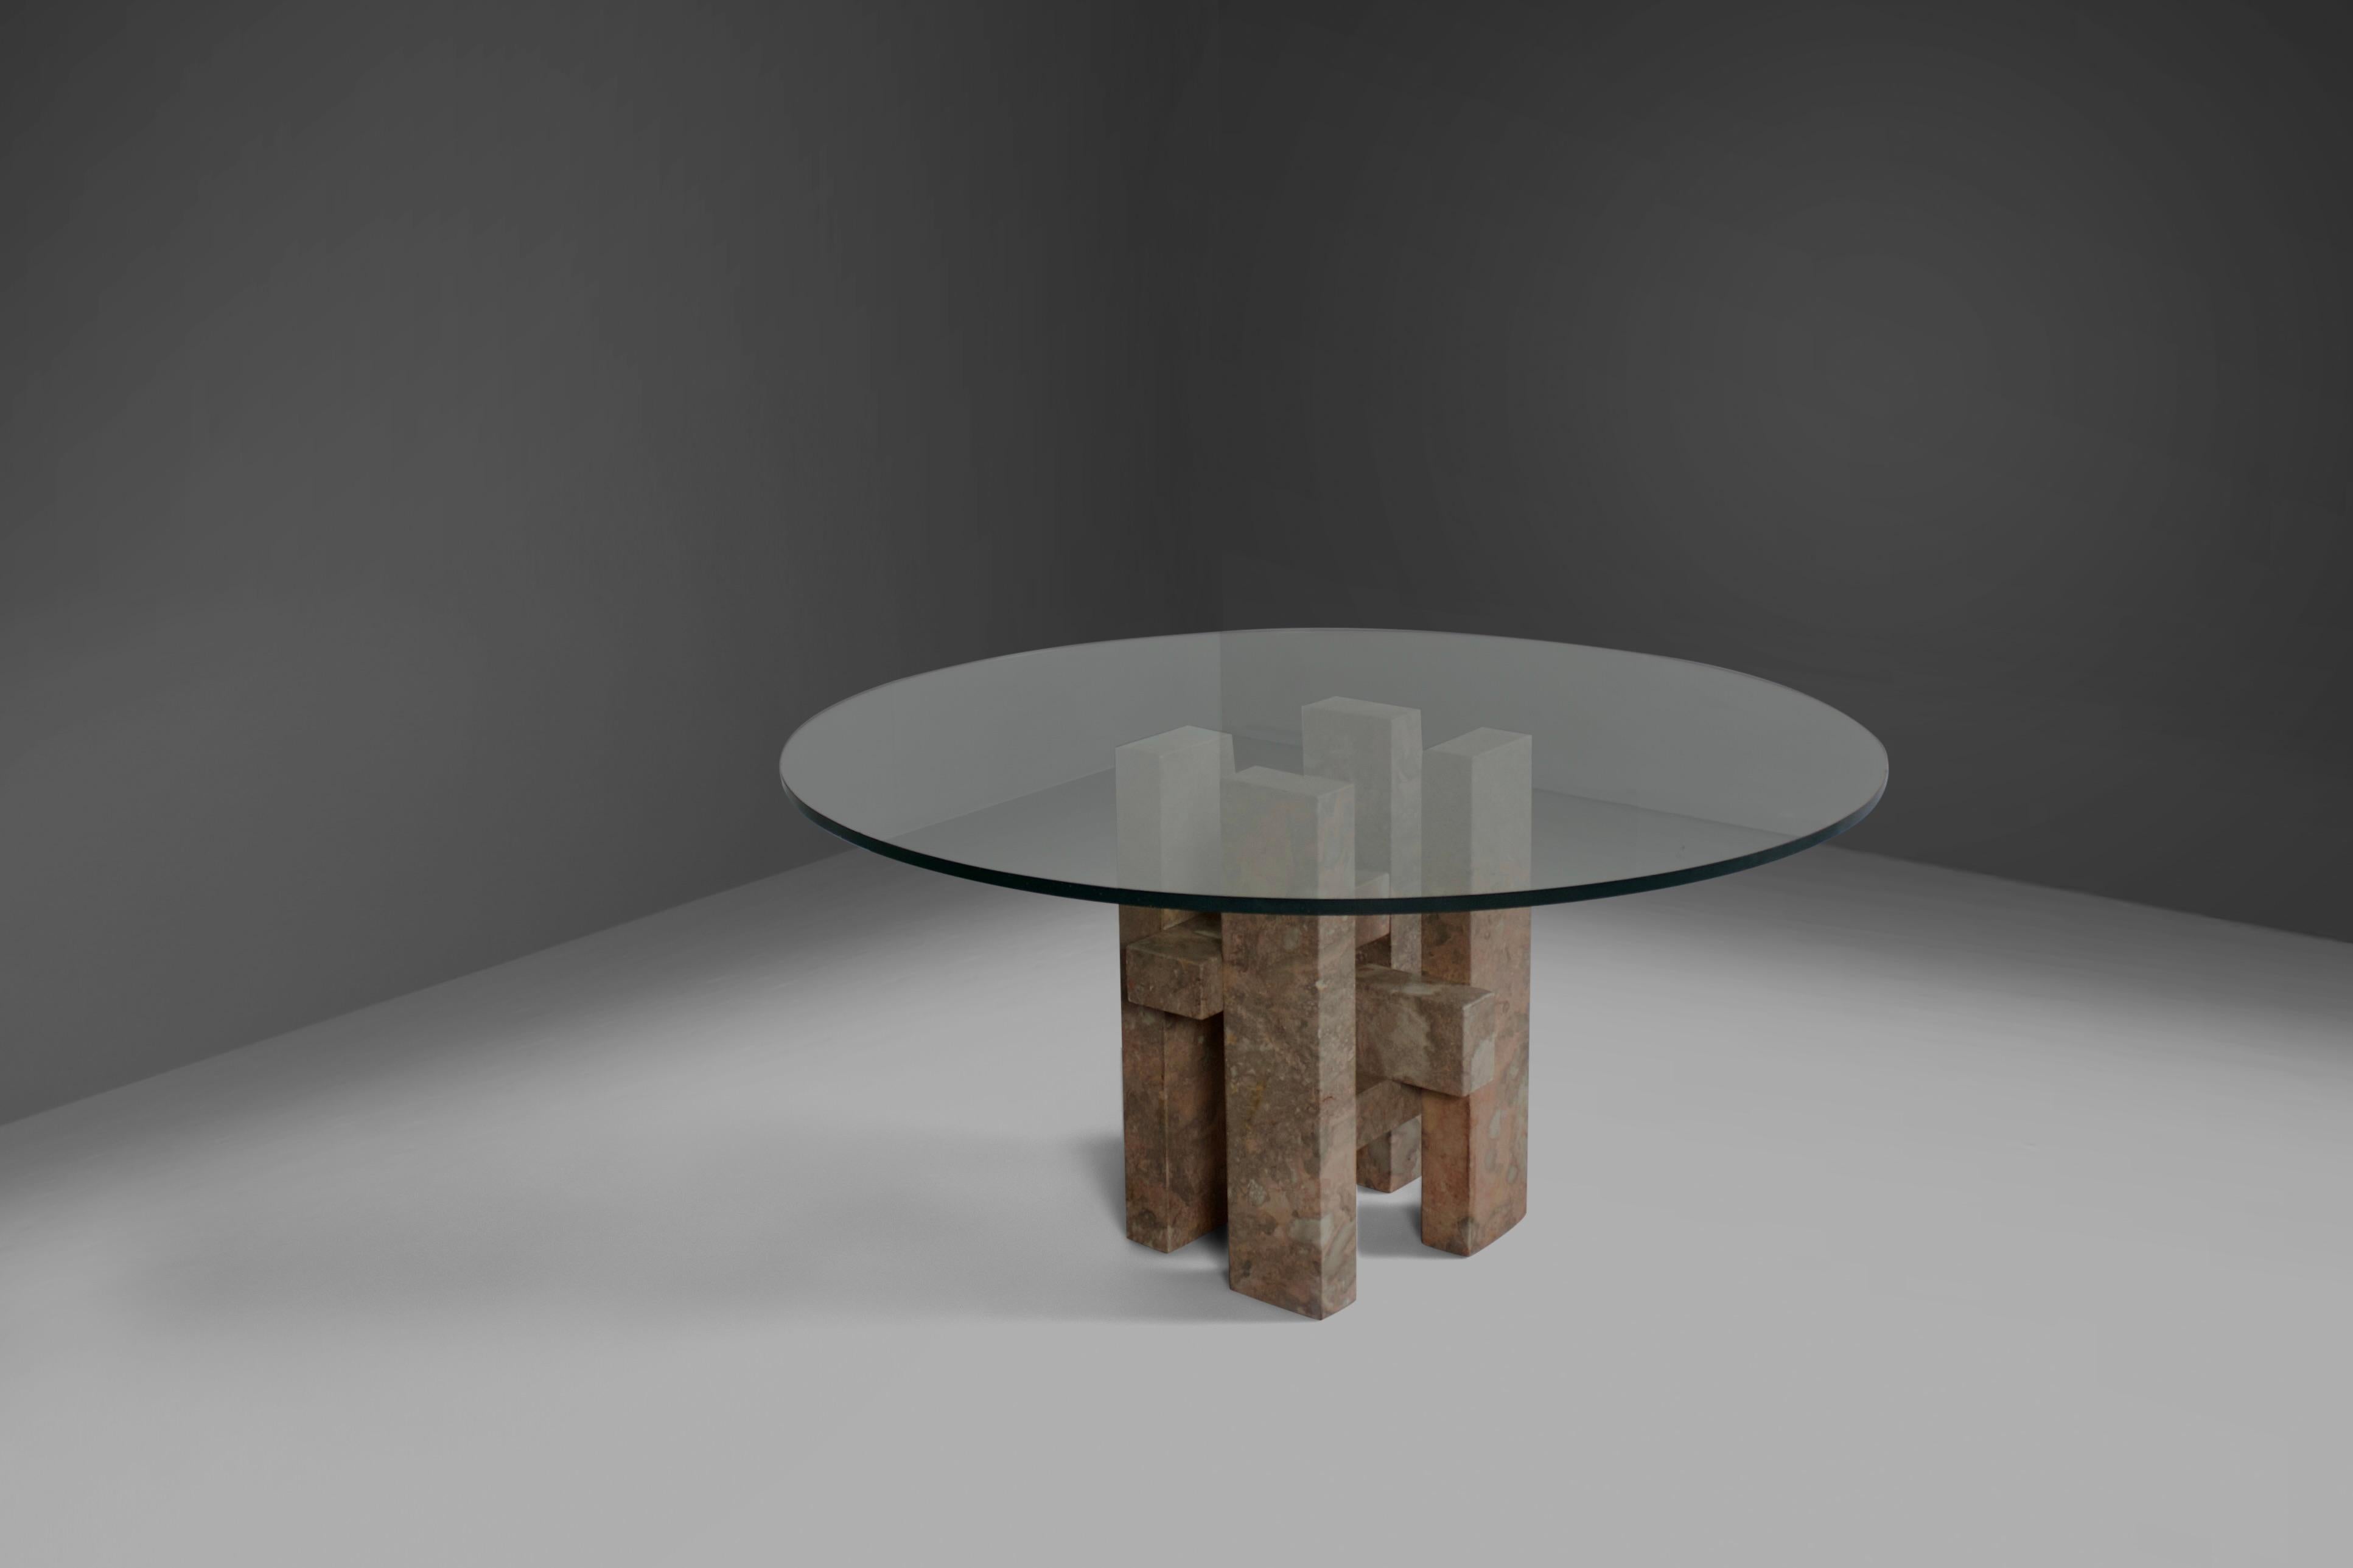 Belgian Sculptural Willy Ballez Dining Table in Marble and Glass, 1970s For Sale